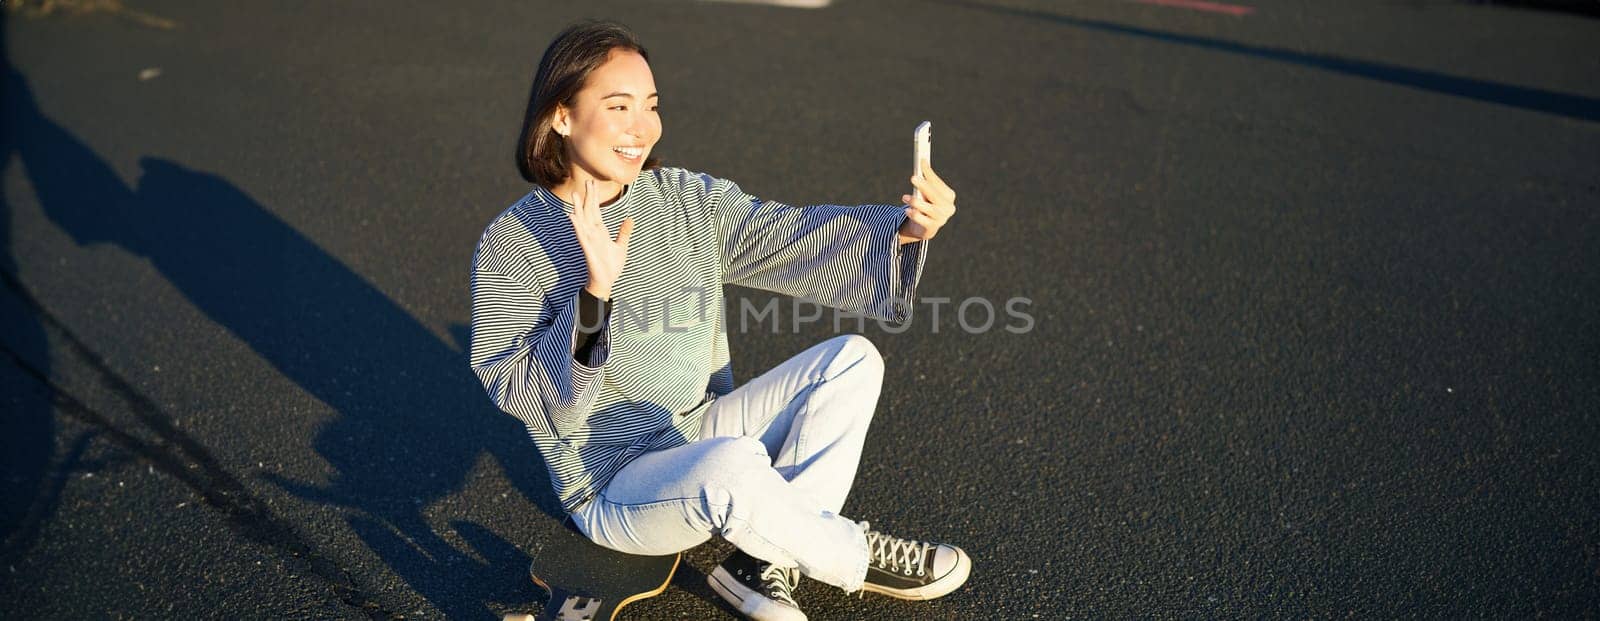 Positive teen asian girl takes selfie, video chats on mobile phone app, sits on skateboard and records vlog.